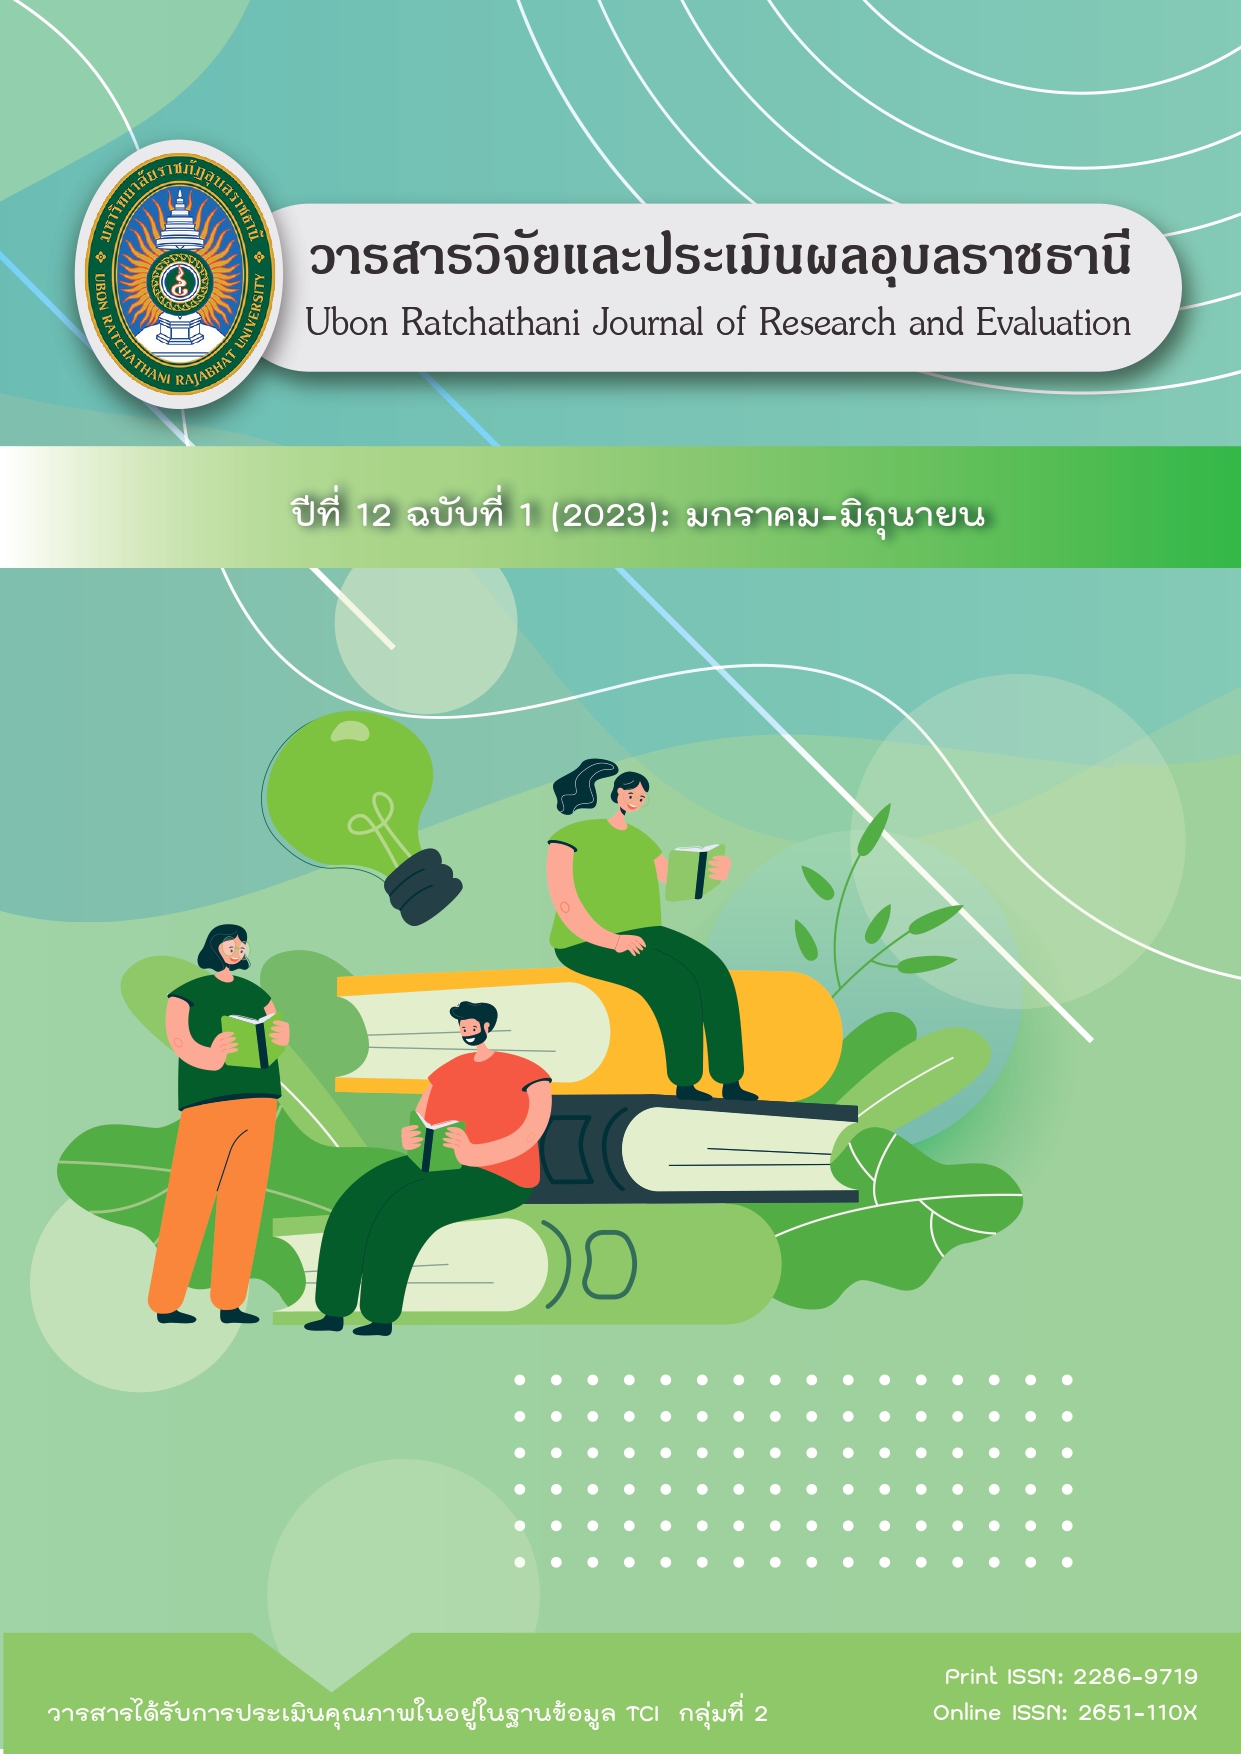 					View Vol. 12 No. 1 (2023): Ubon Ratchathani Journal of Research and Evaluation
				